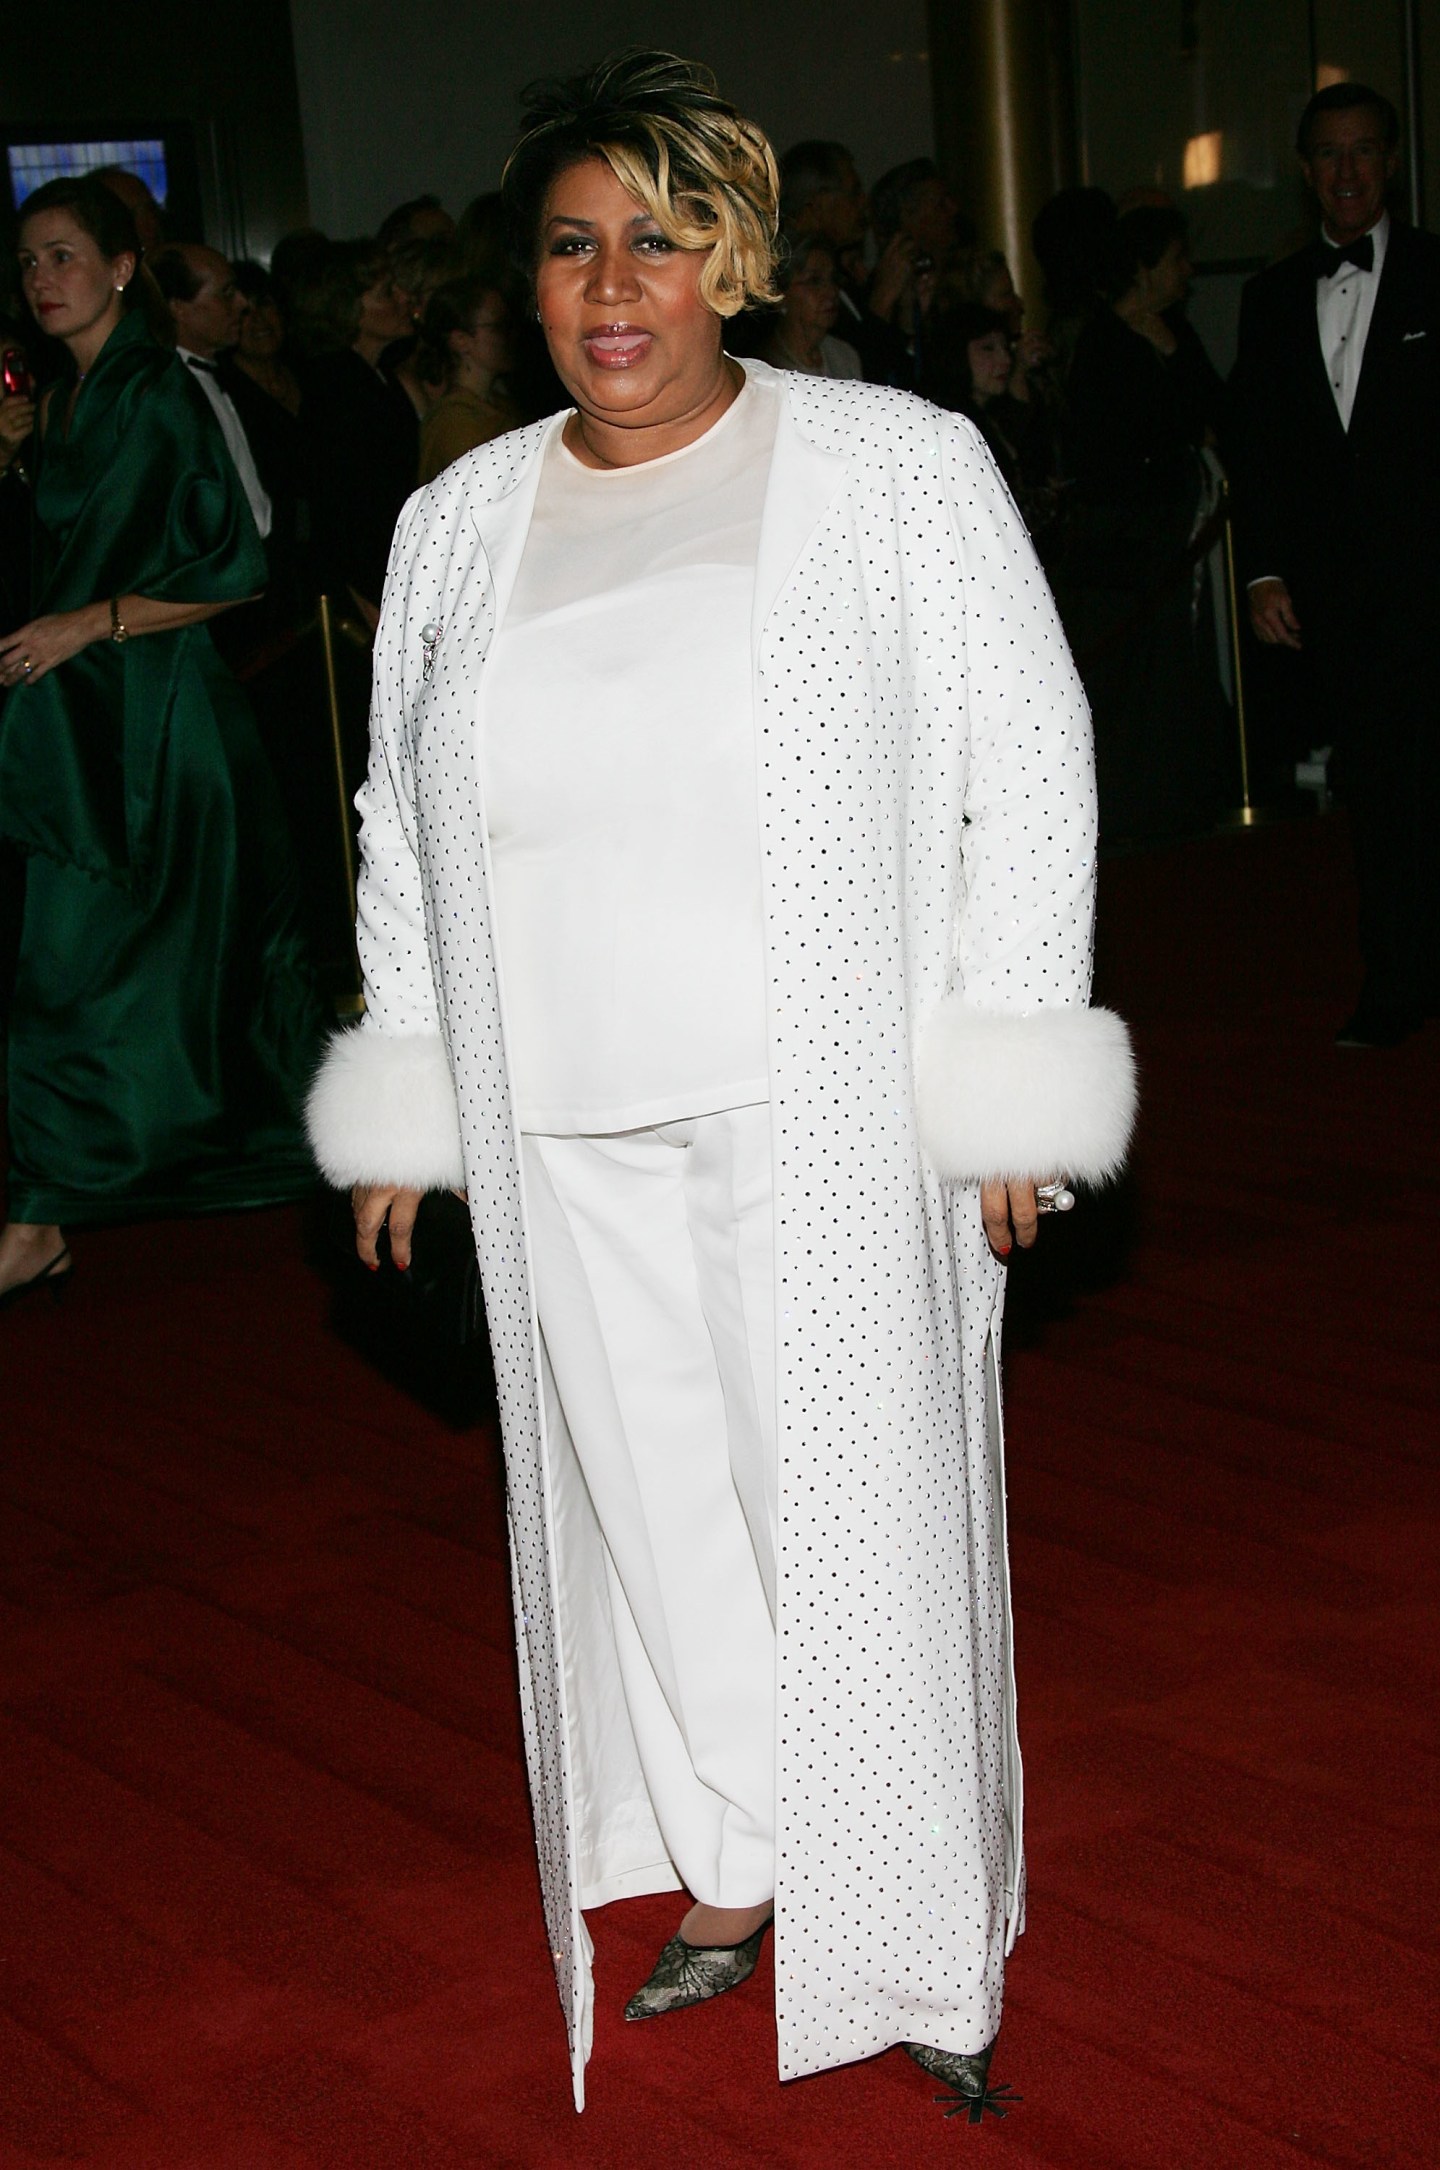 Remembering Aretha Franklin’s elegantly over-the-top personal style